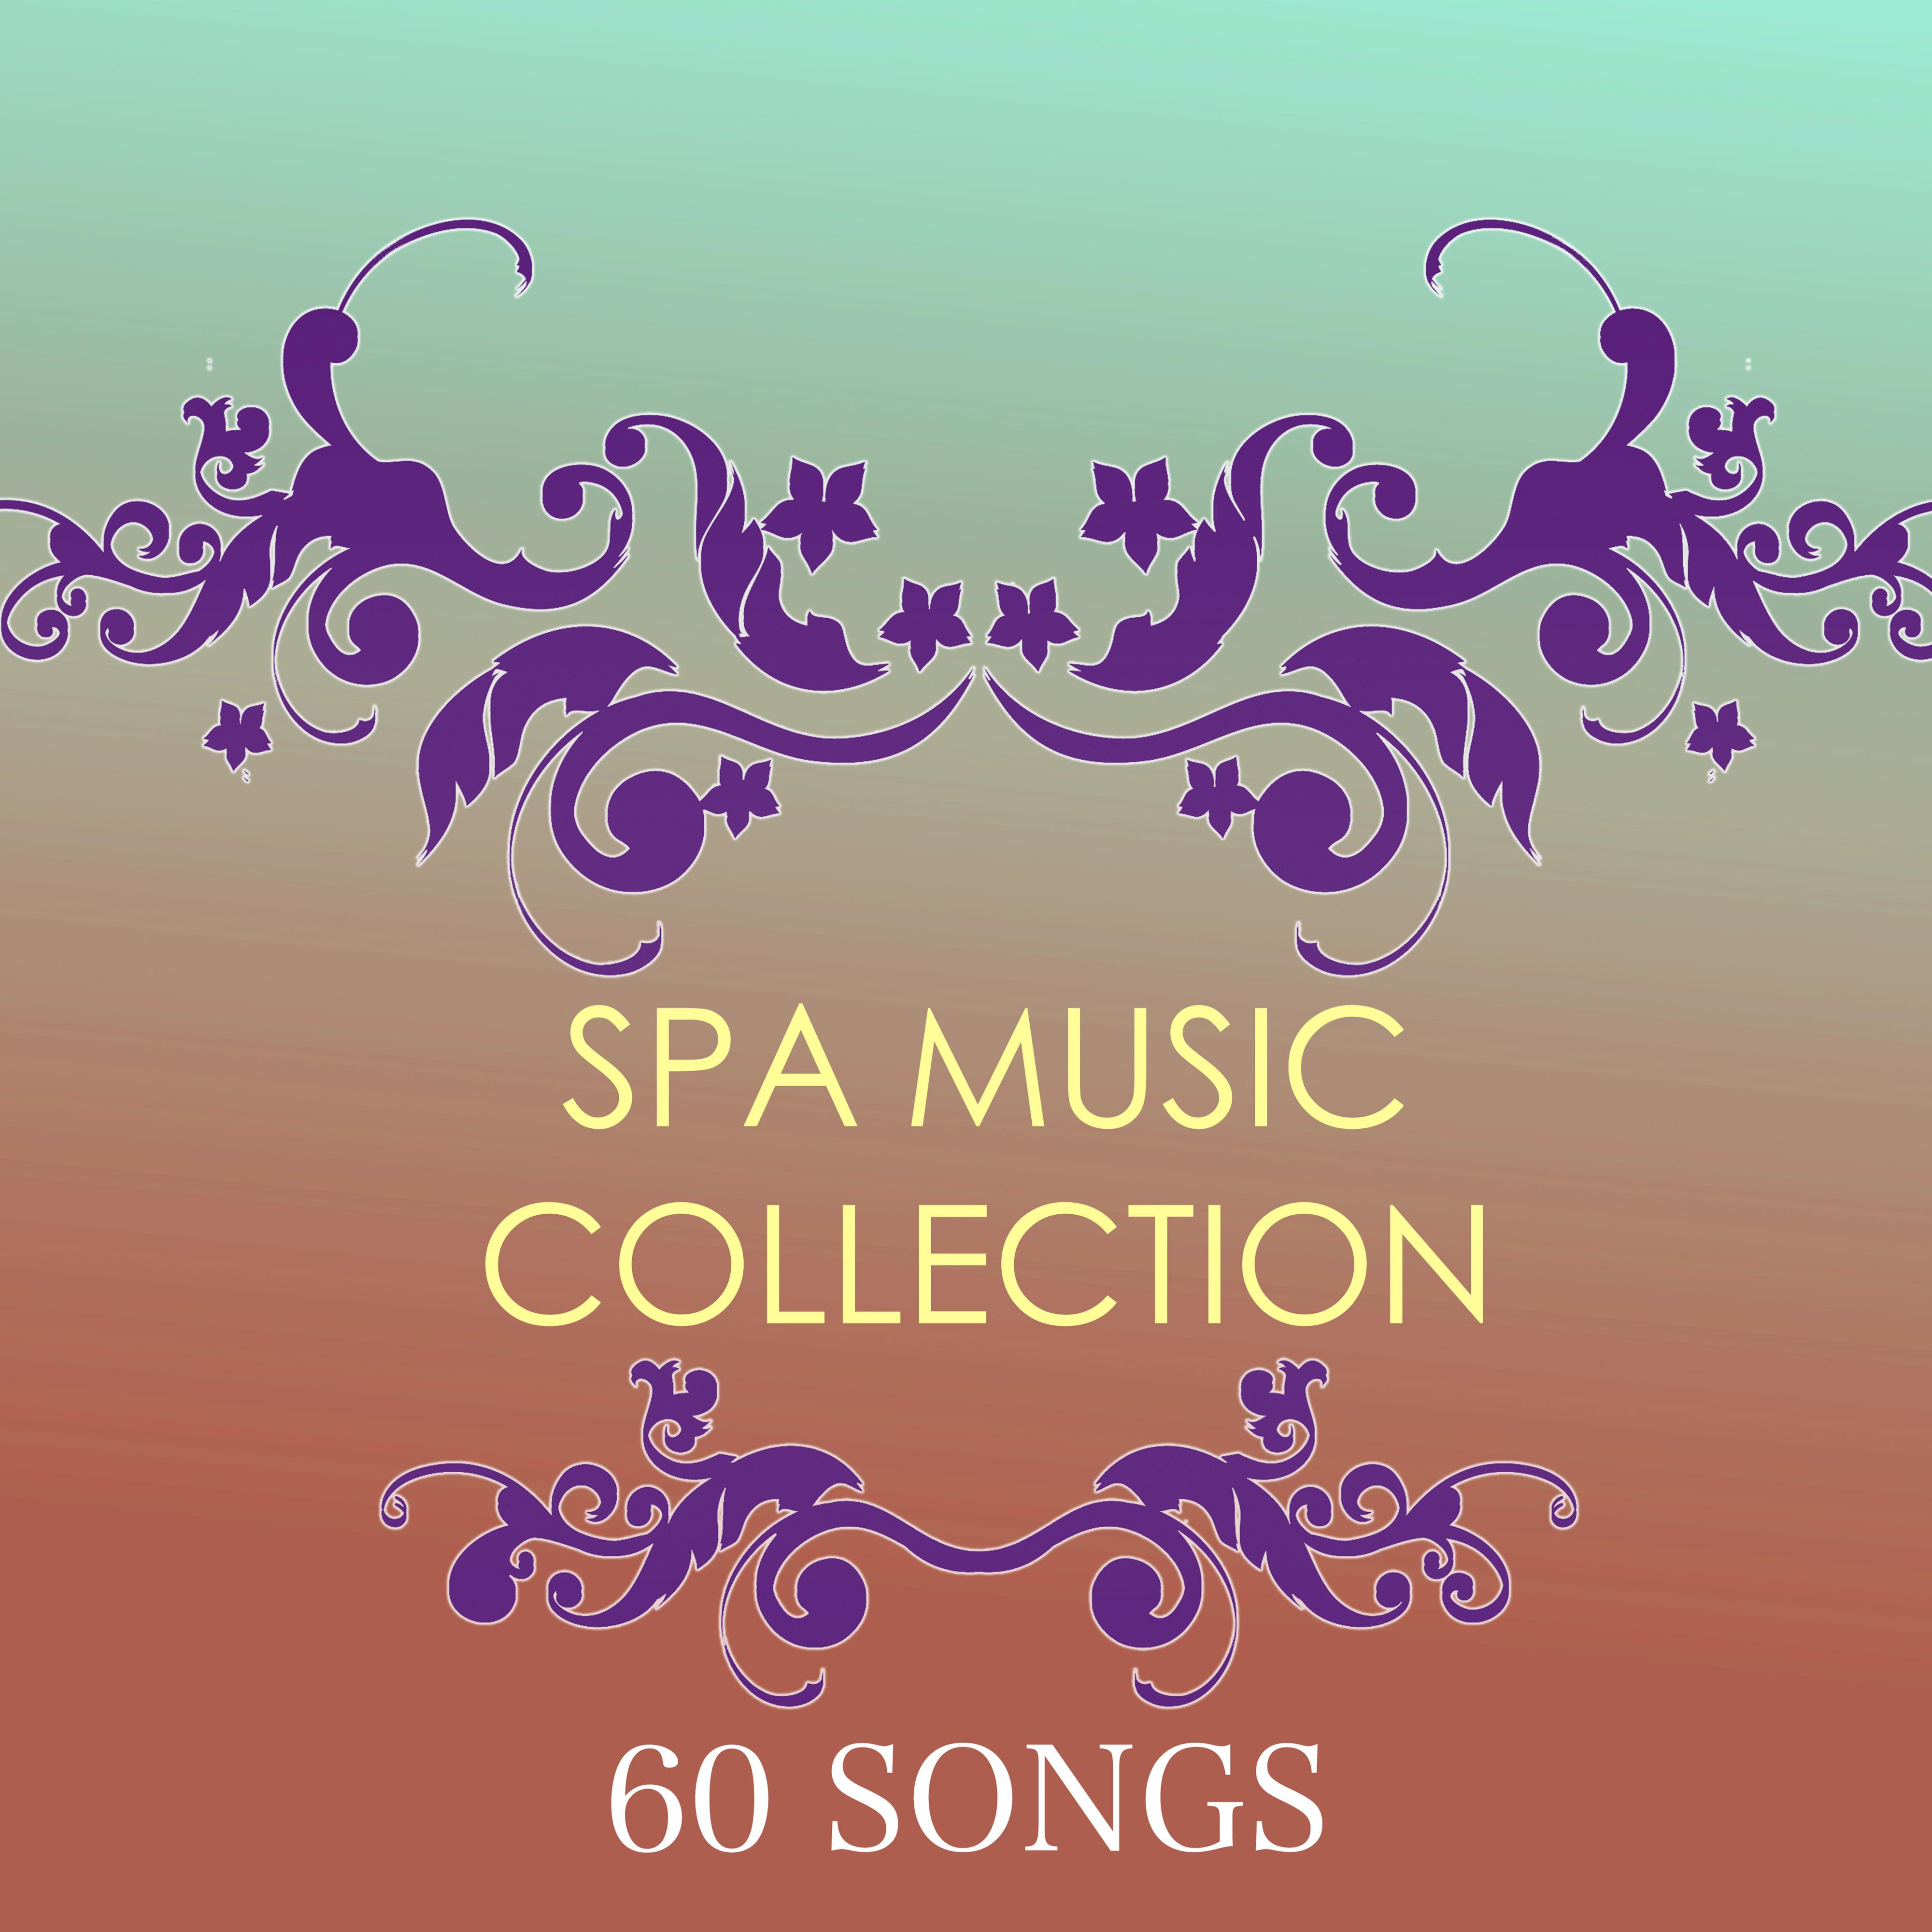 Spa Music Collection 2014 - Best New Spa Sounds for Relaxing Spa Day At Home